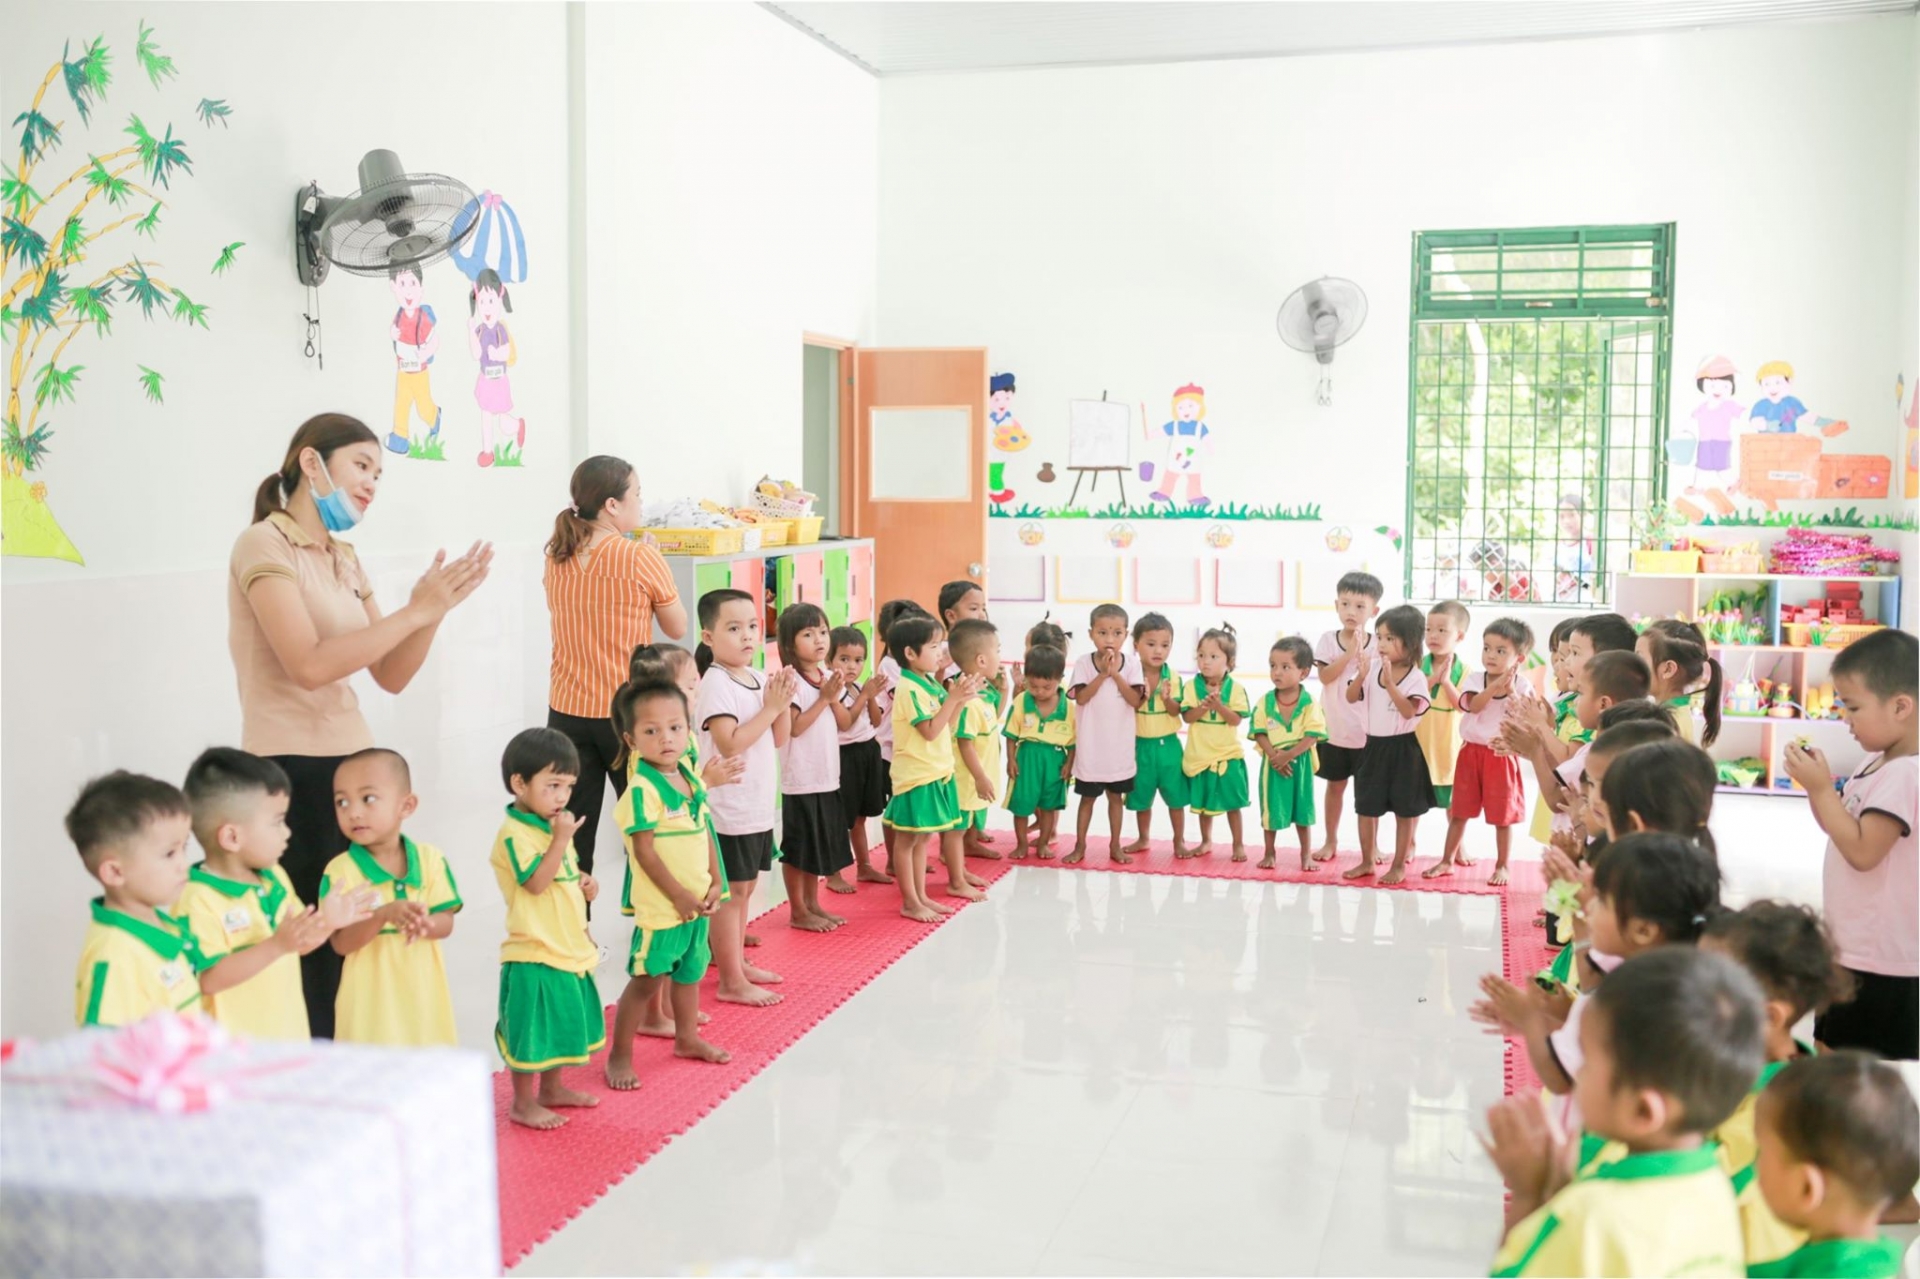 Another kindergarten built by peacetrees vietnam in quang tri